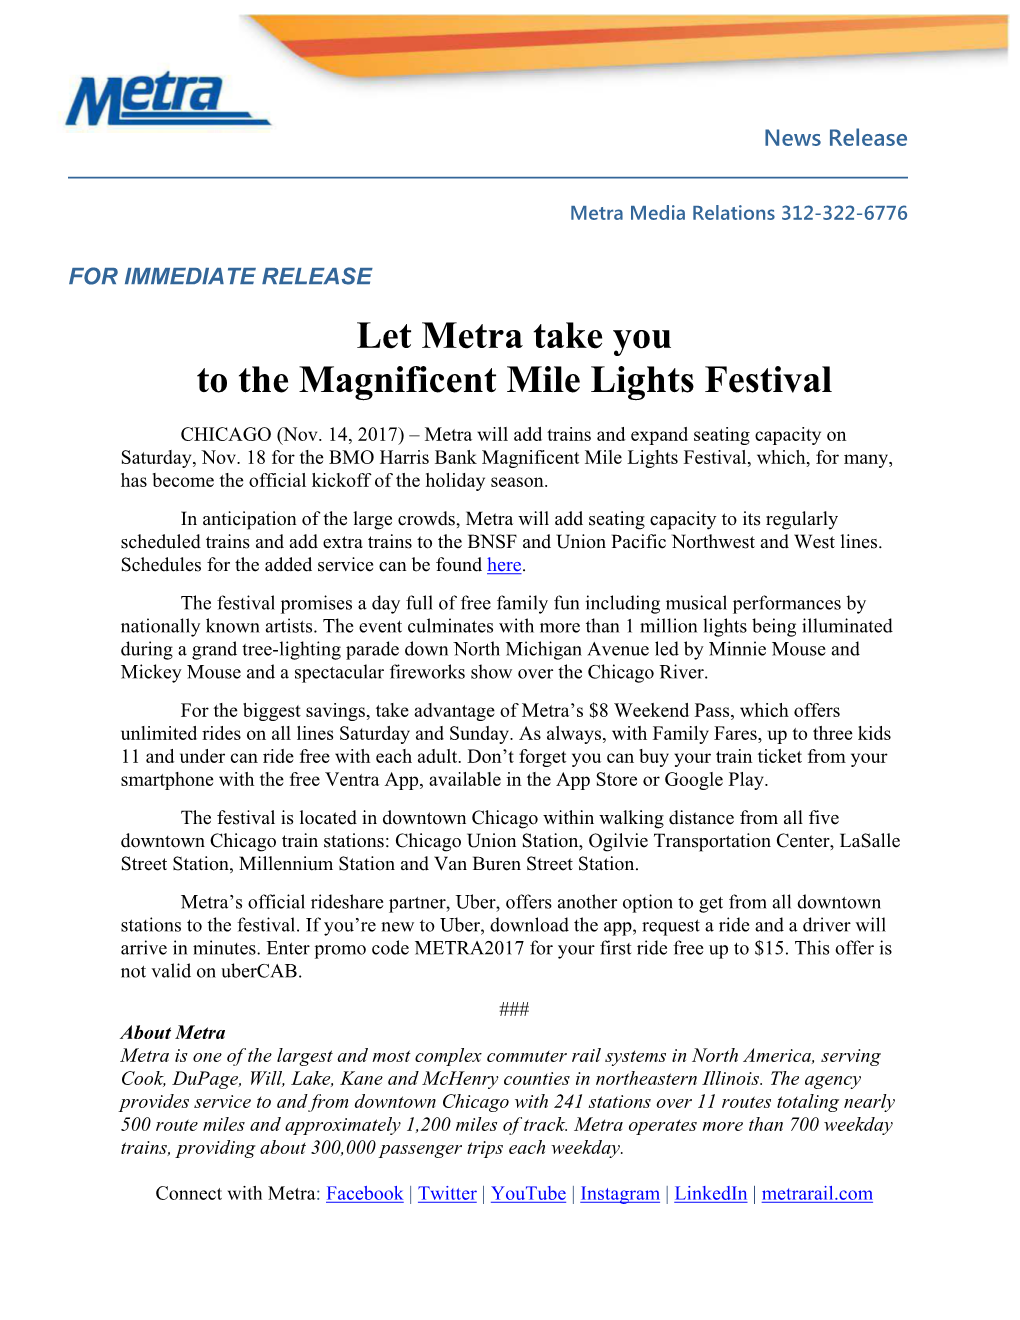 Let Metra Take You to the Magnificent Mile Lights Festival